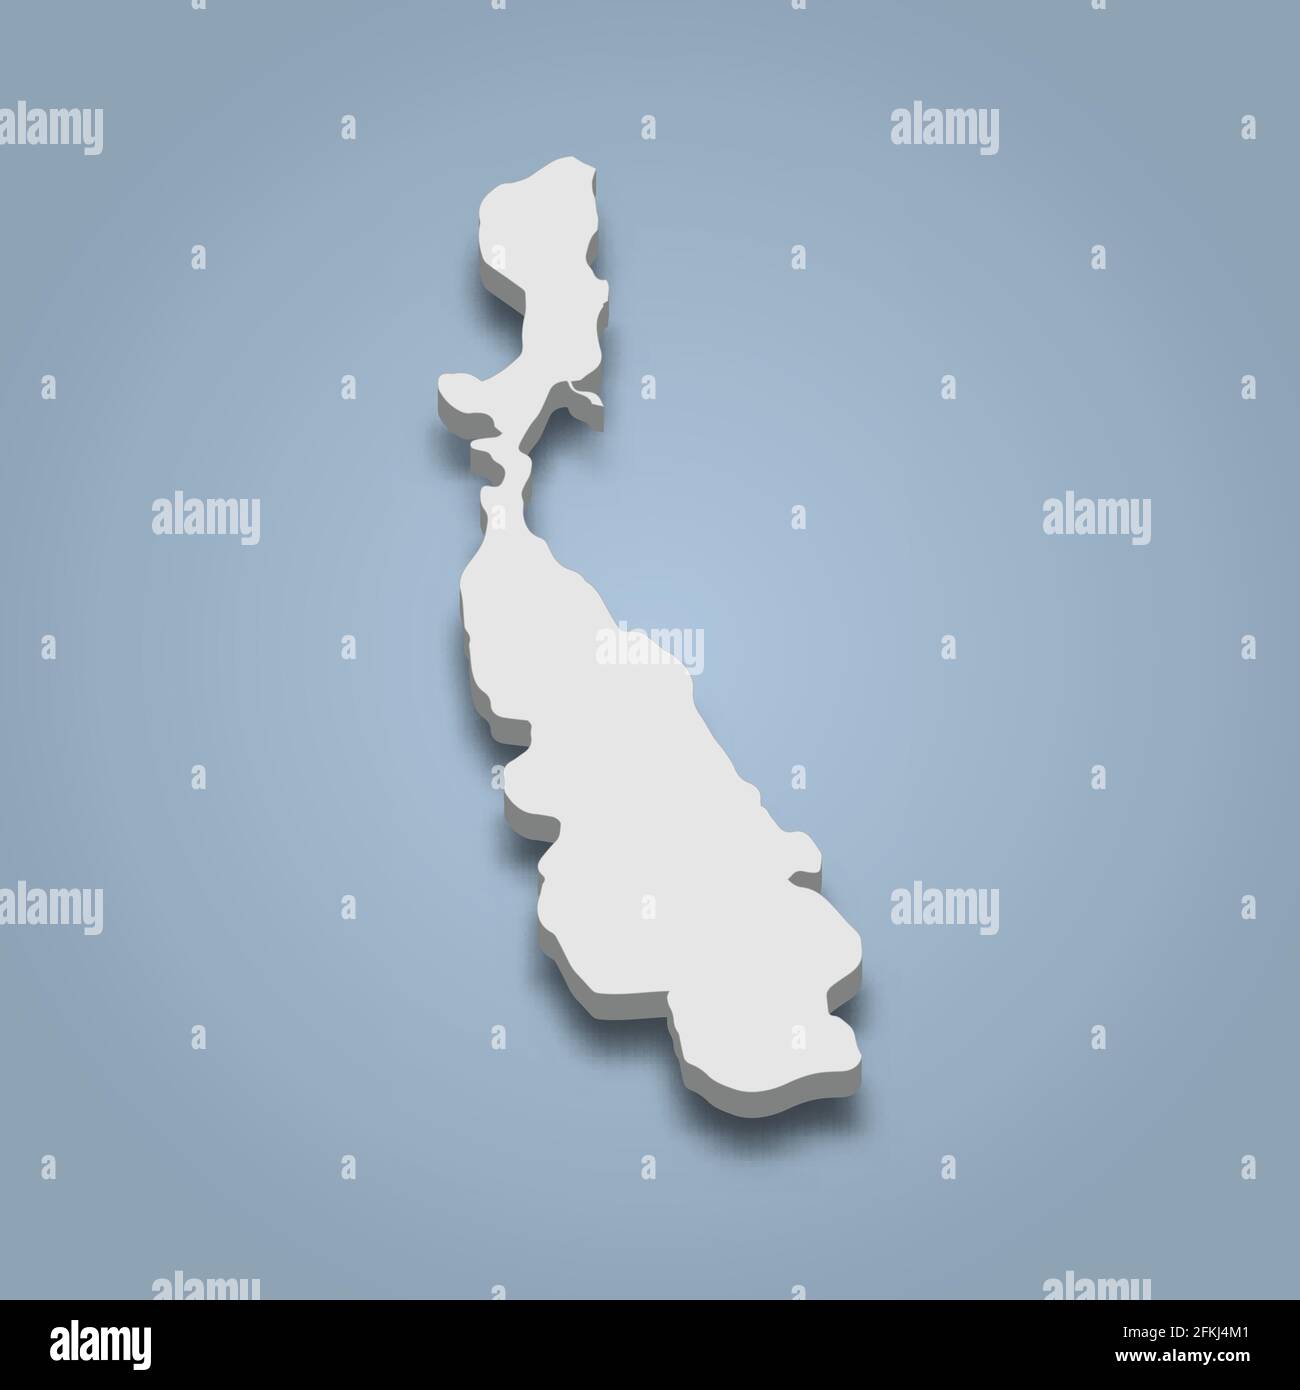 3d isometric map of Long is an island in Whitsunday Islands, isolaated vector illustration Stock Vector